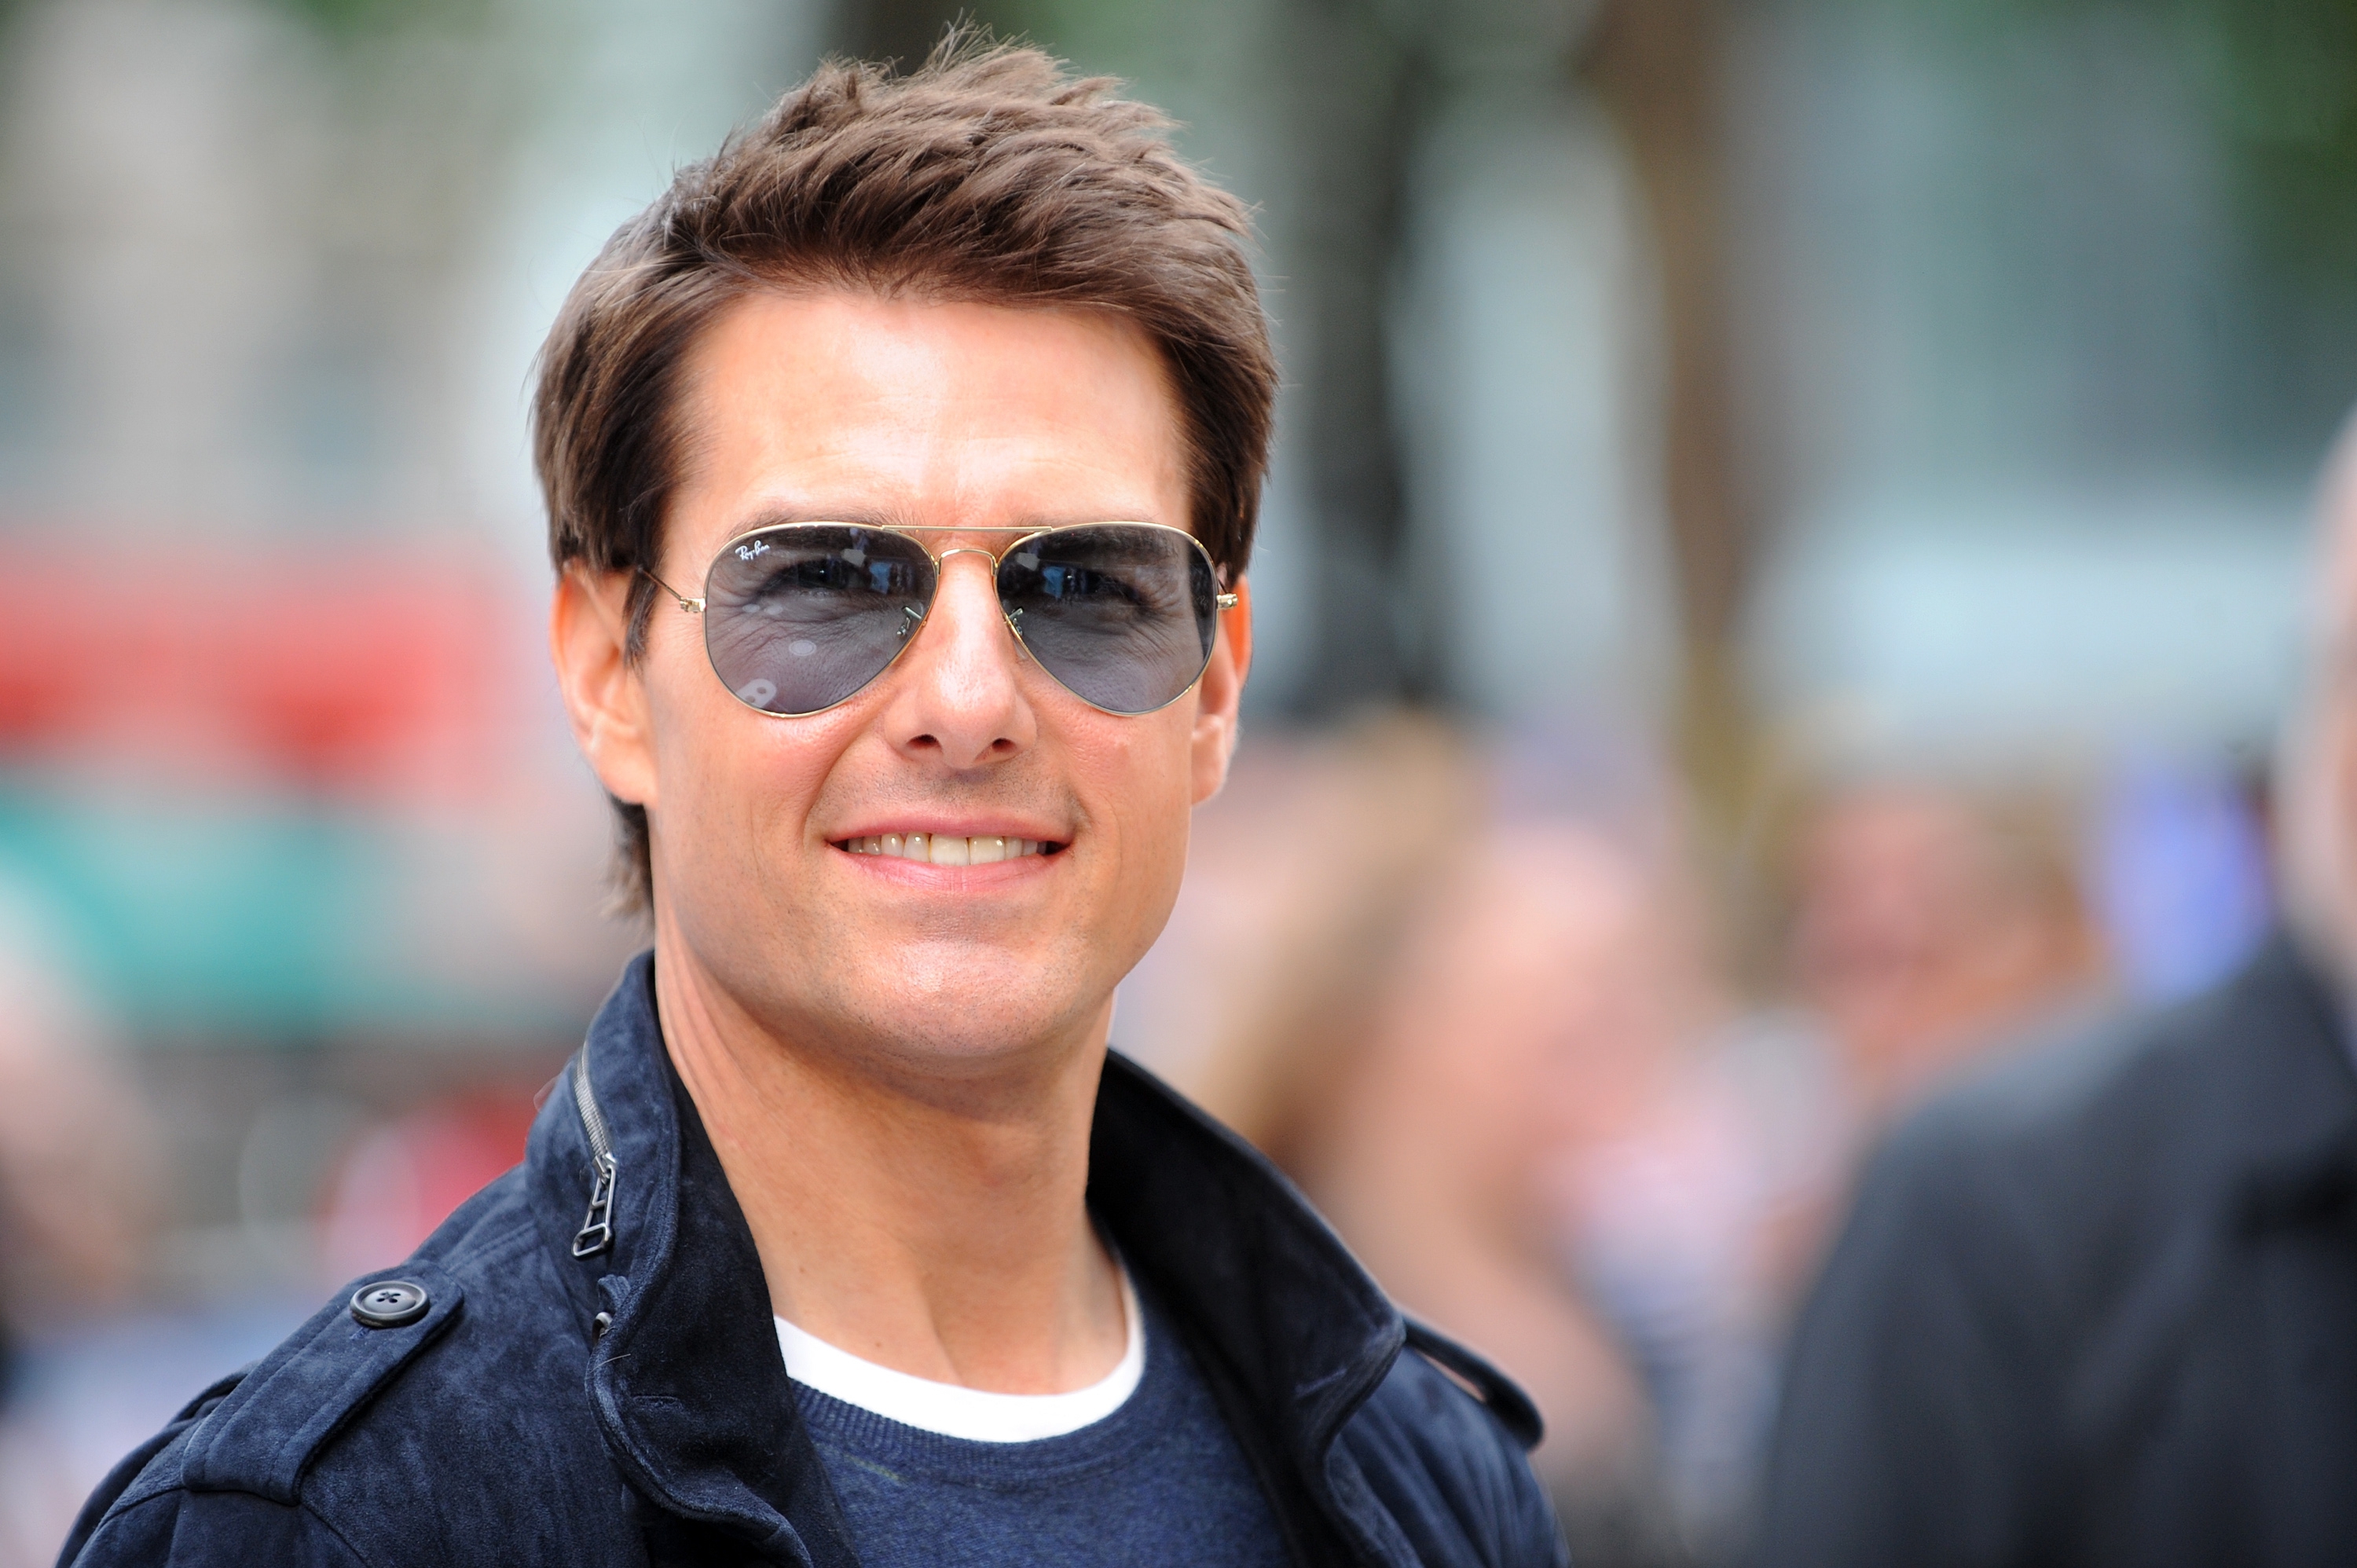 Tom Cruise Wallpaper Image Photos Pictures Background